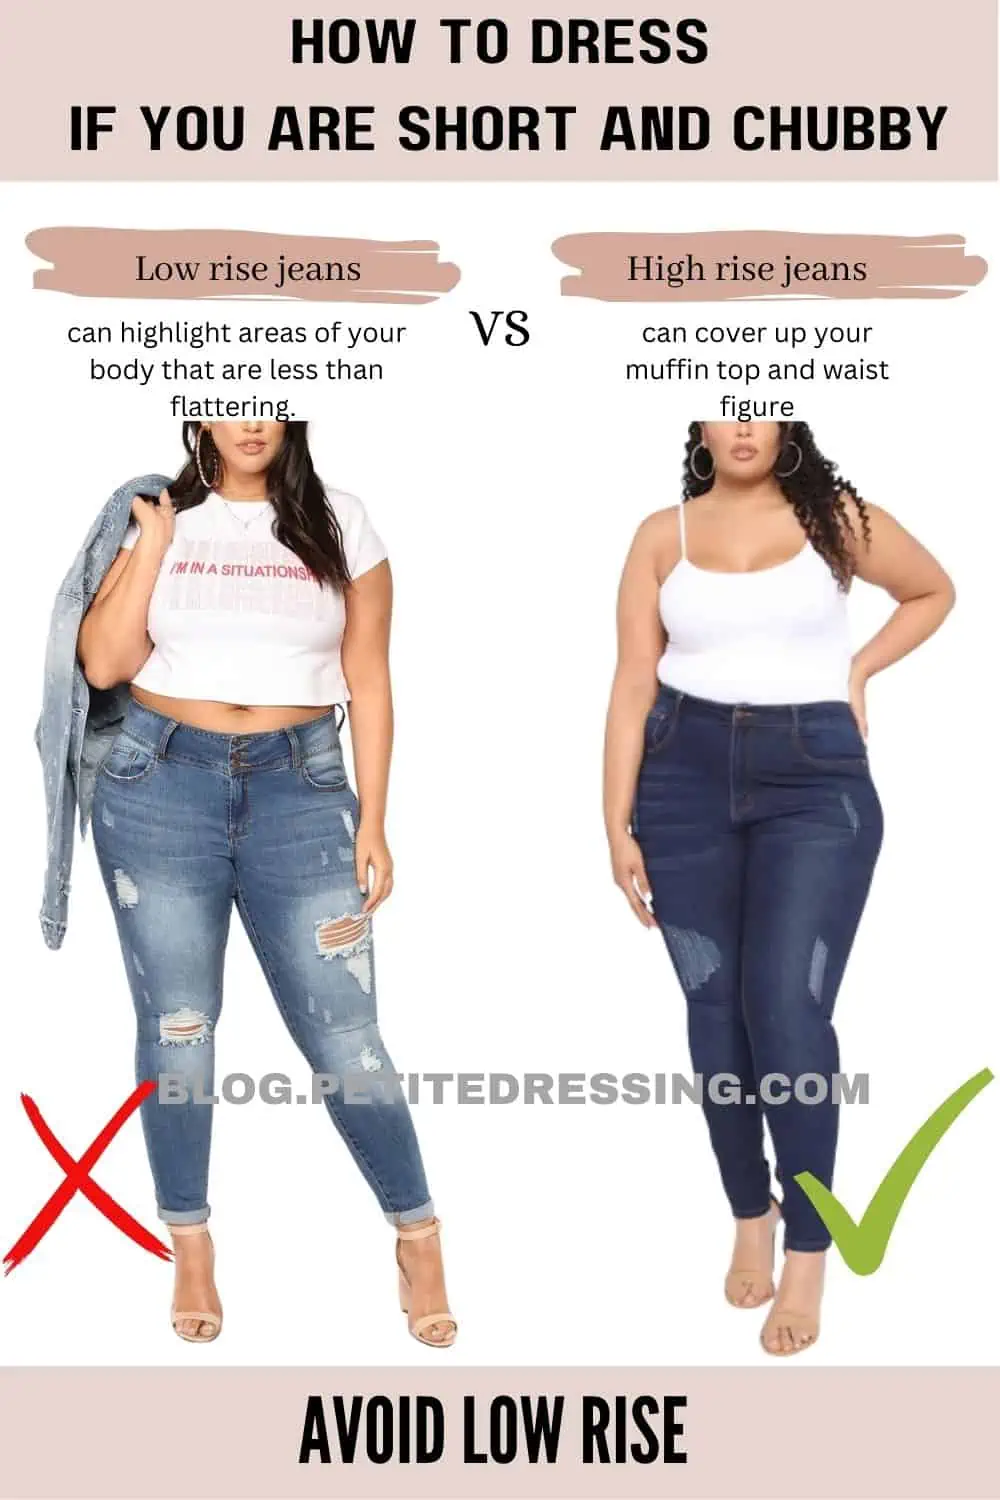 10 Best Ways To Dress If You Are Short And Chubby